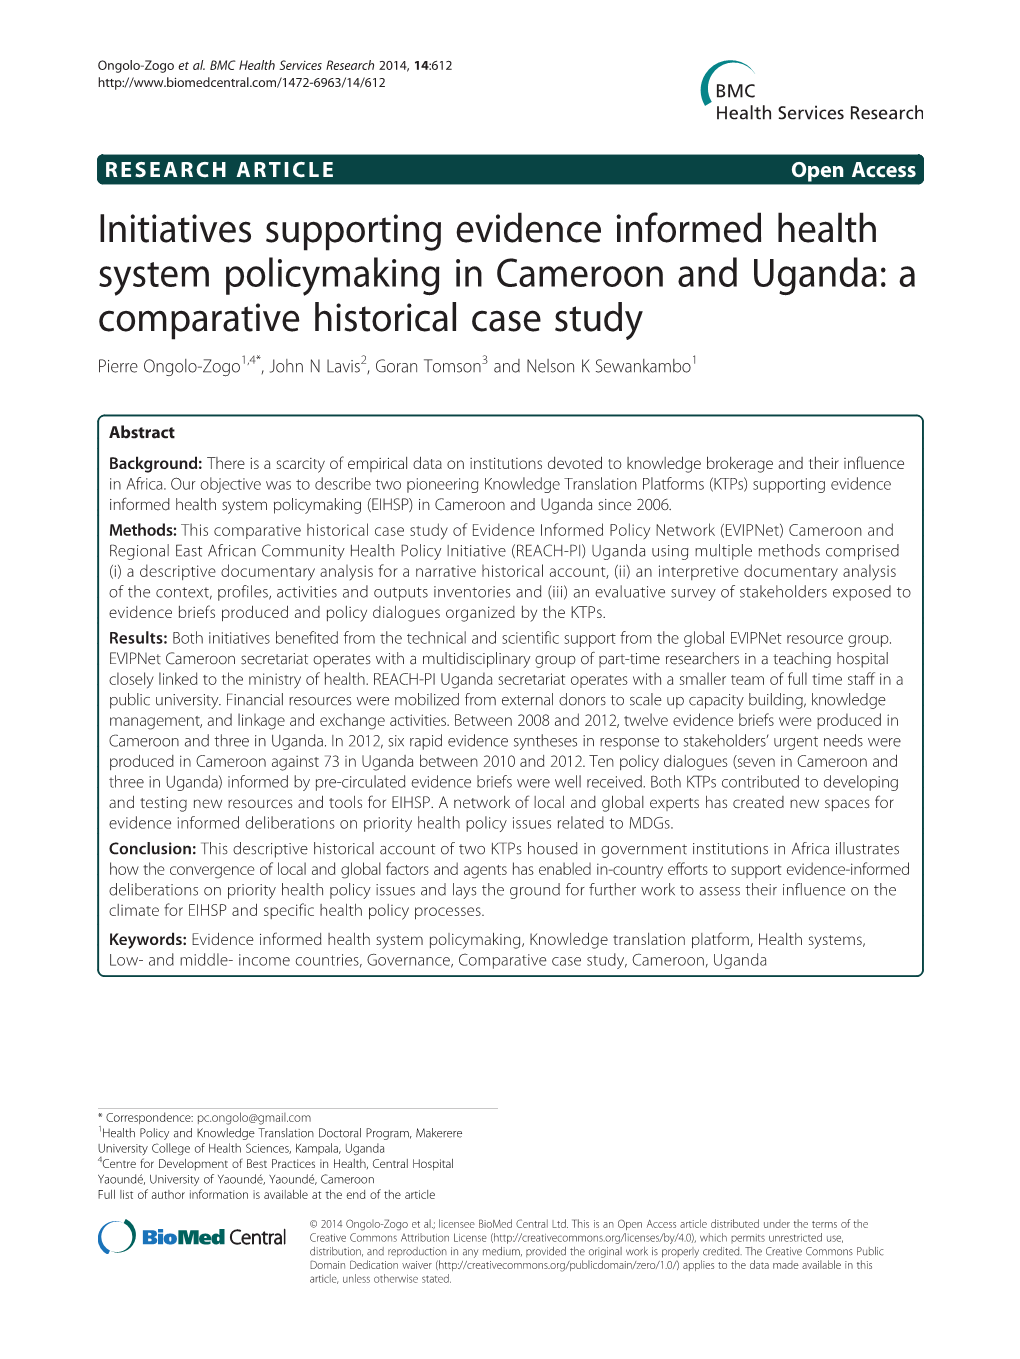 Initiatives Supporting Evidence Informed Health